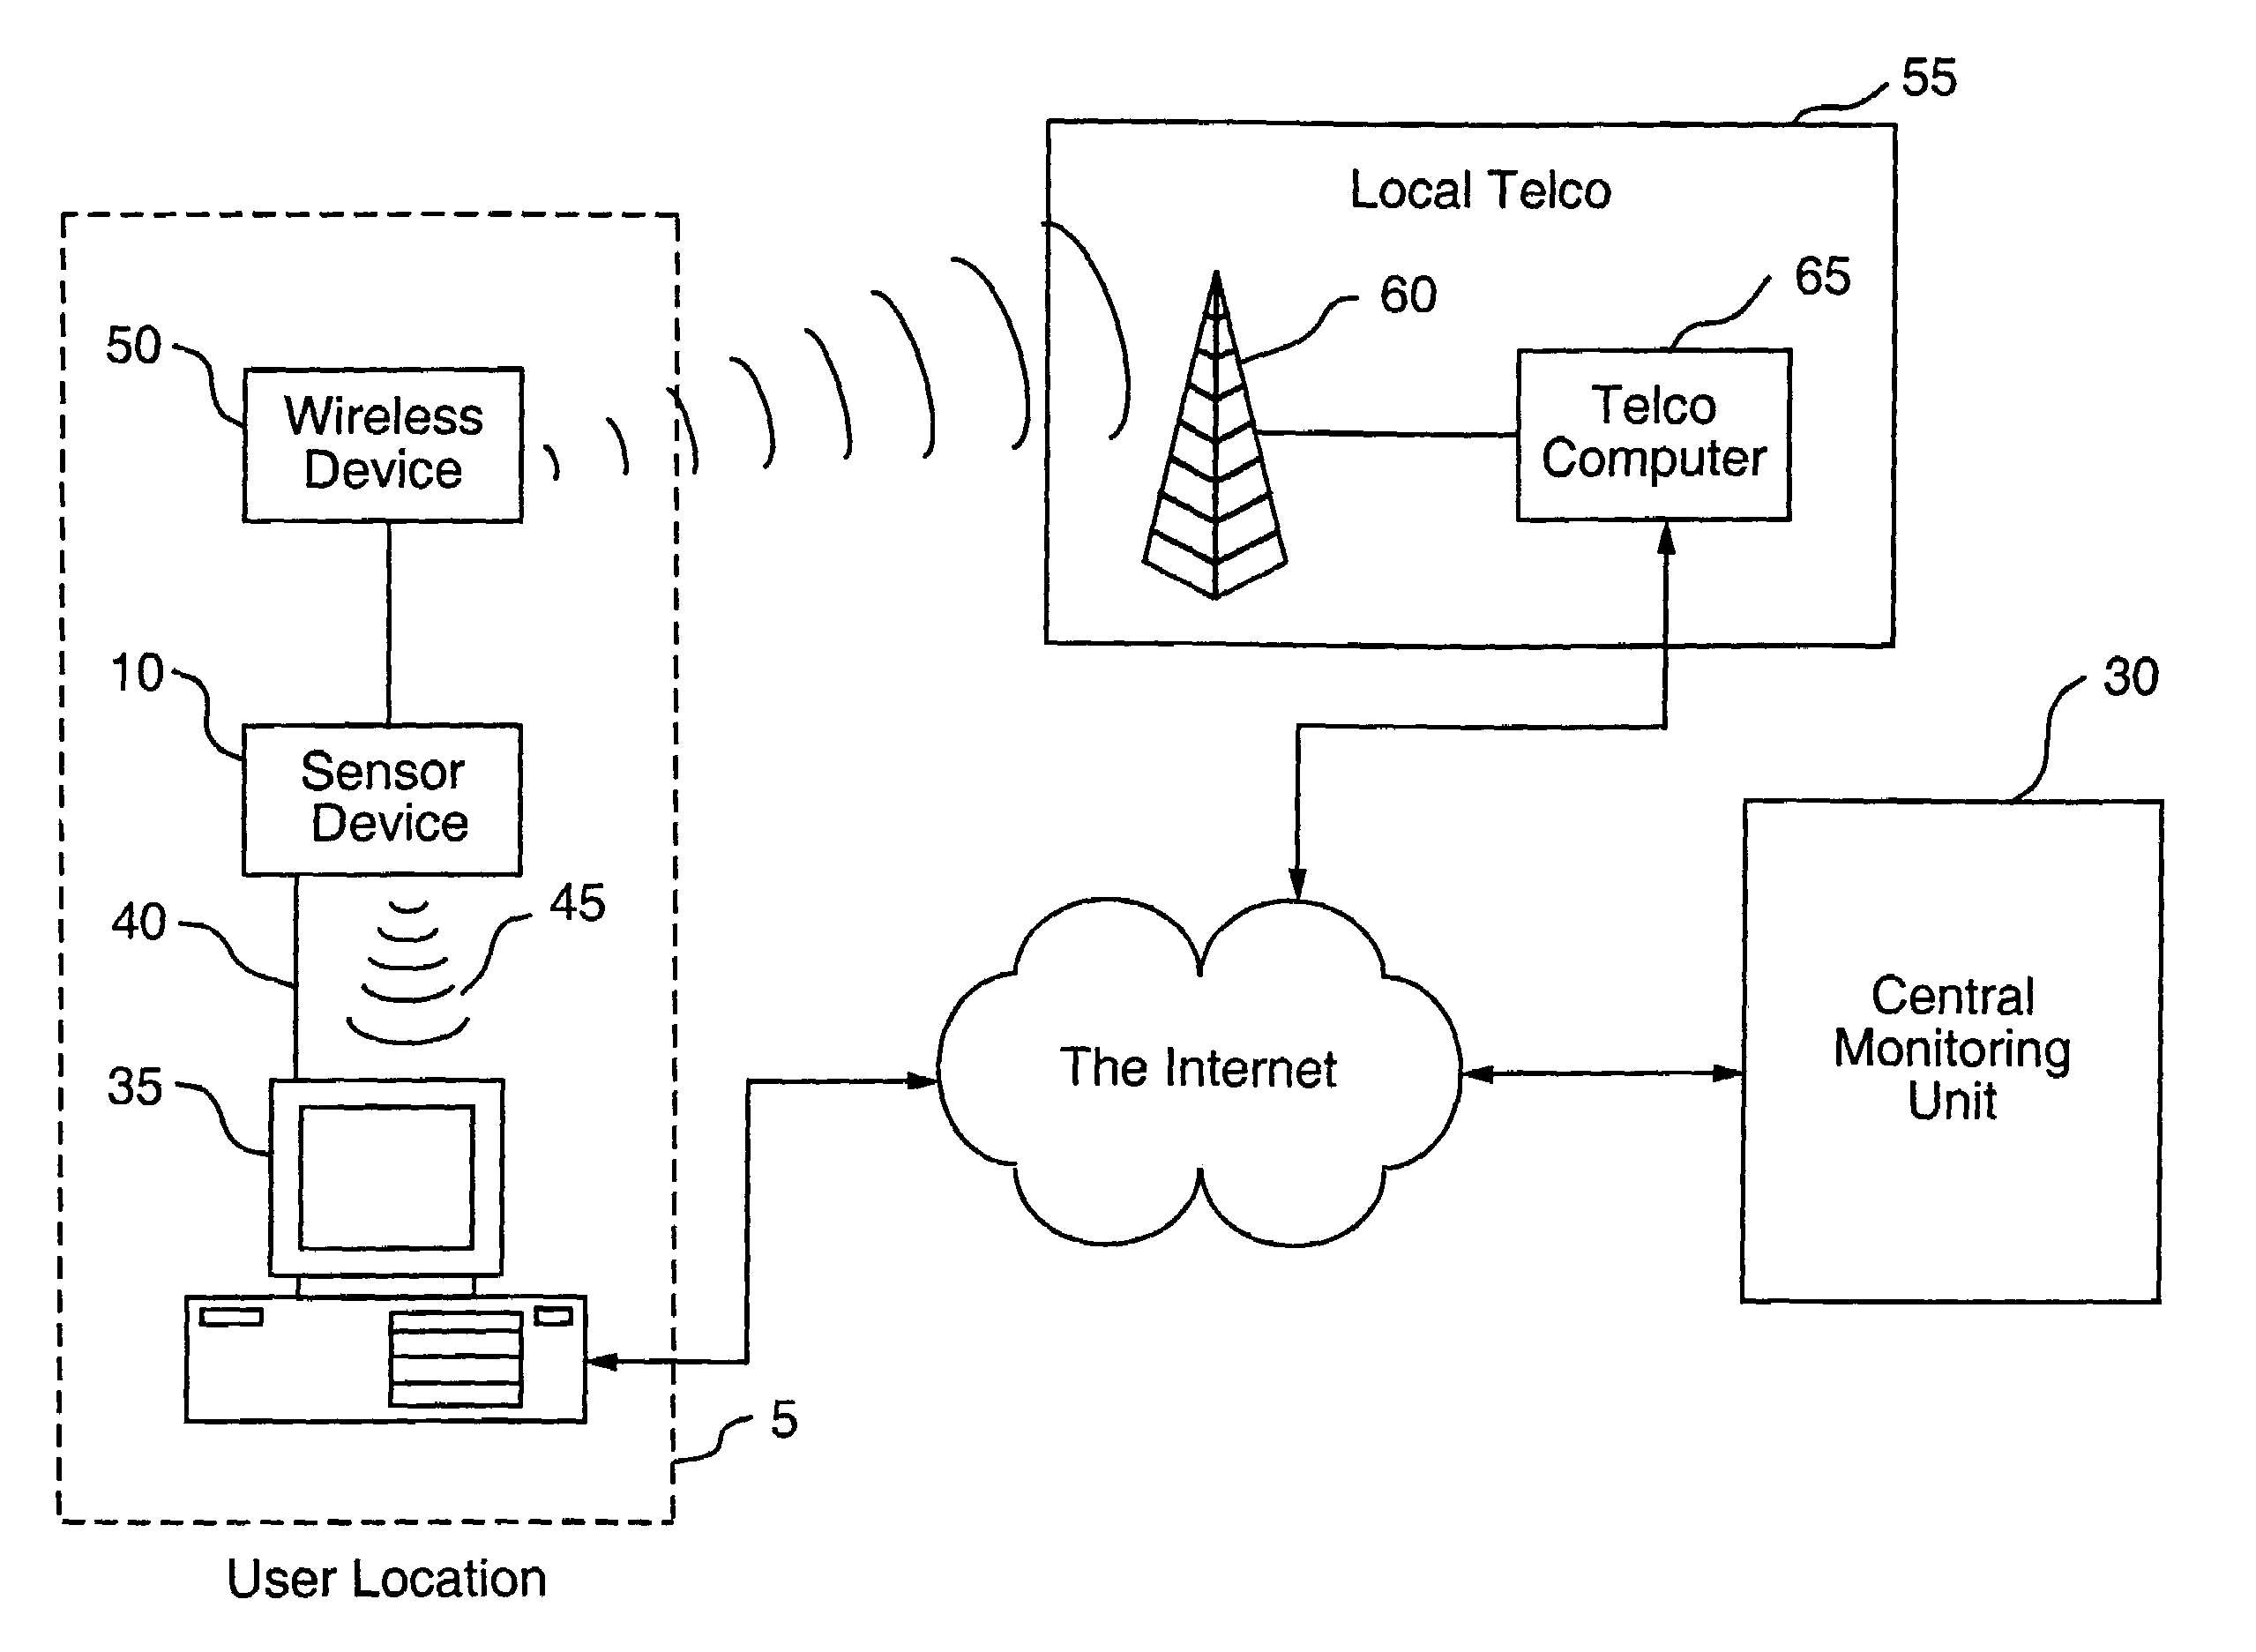 Apparatus for monitoring health, wellness and fitness